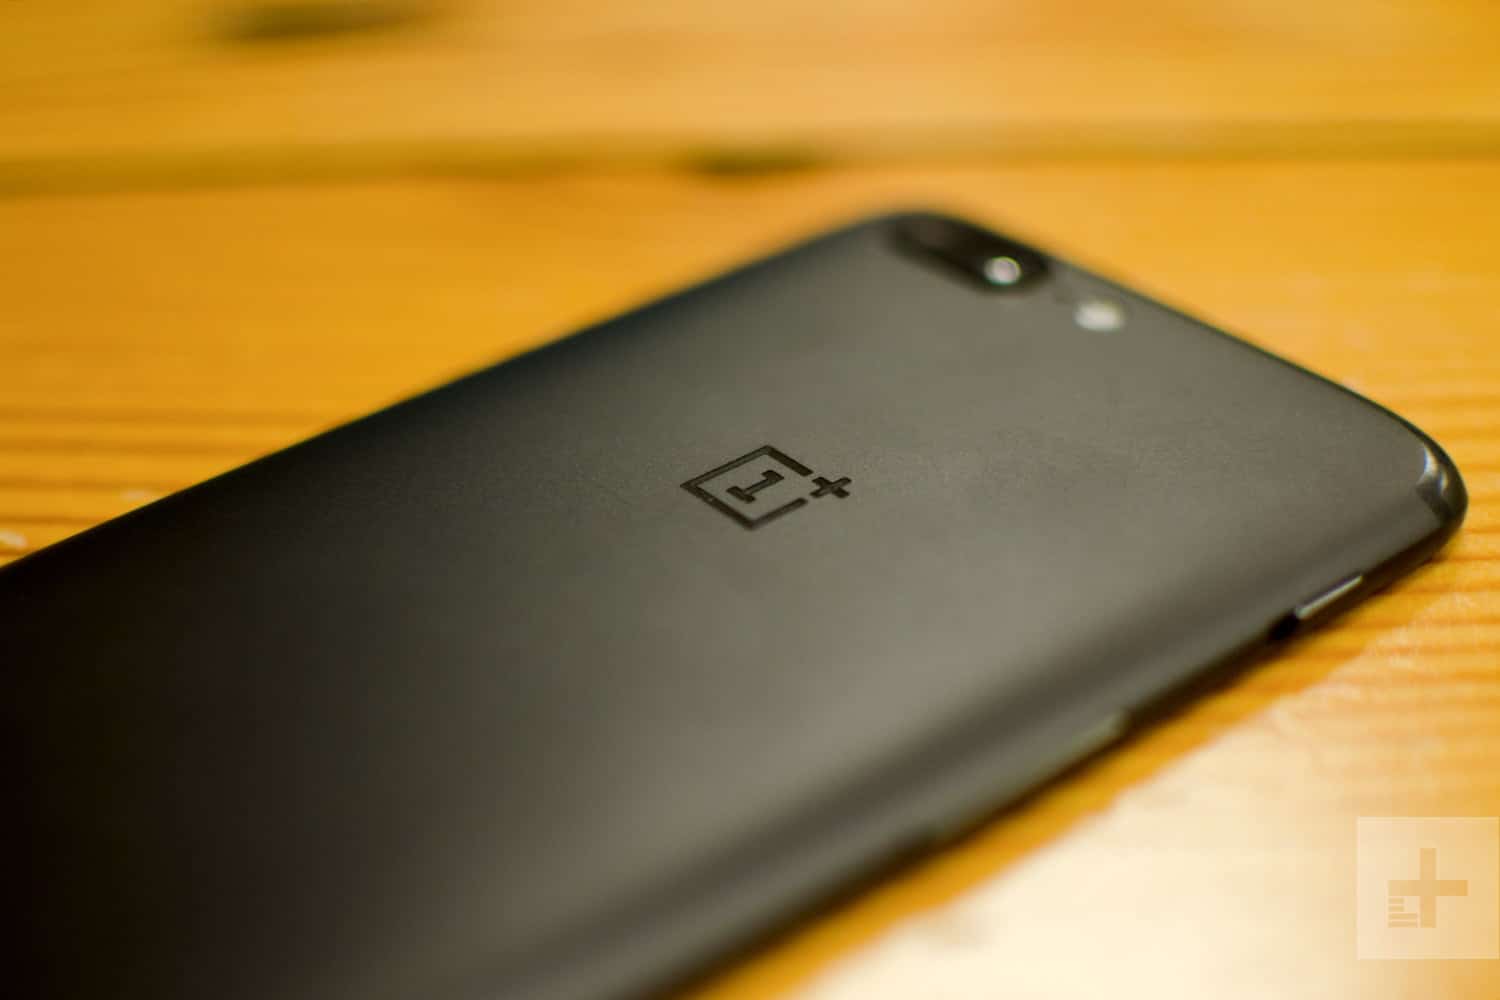 Up to 40,000 OnePlus customers affected by credit card security breach 1